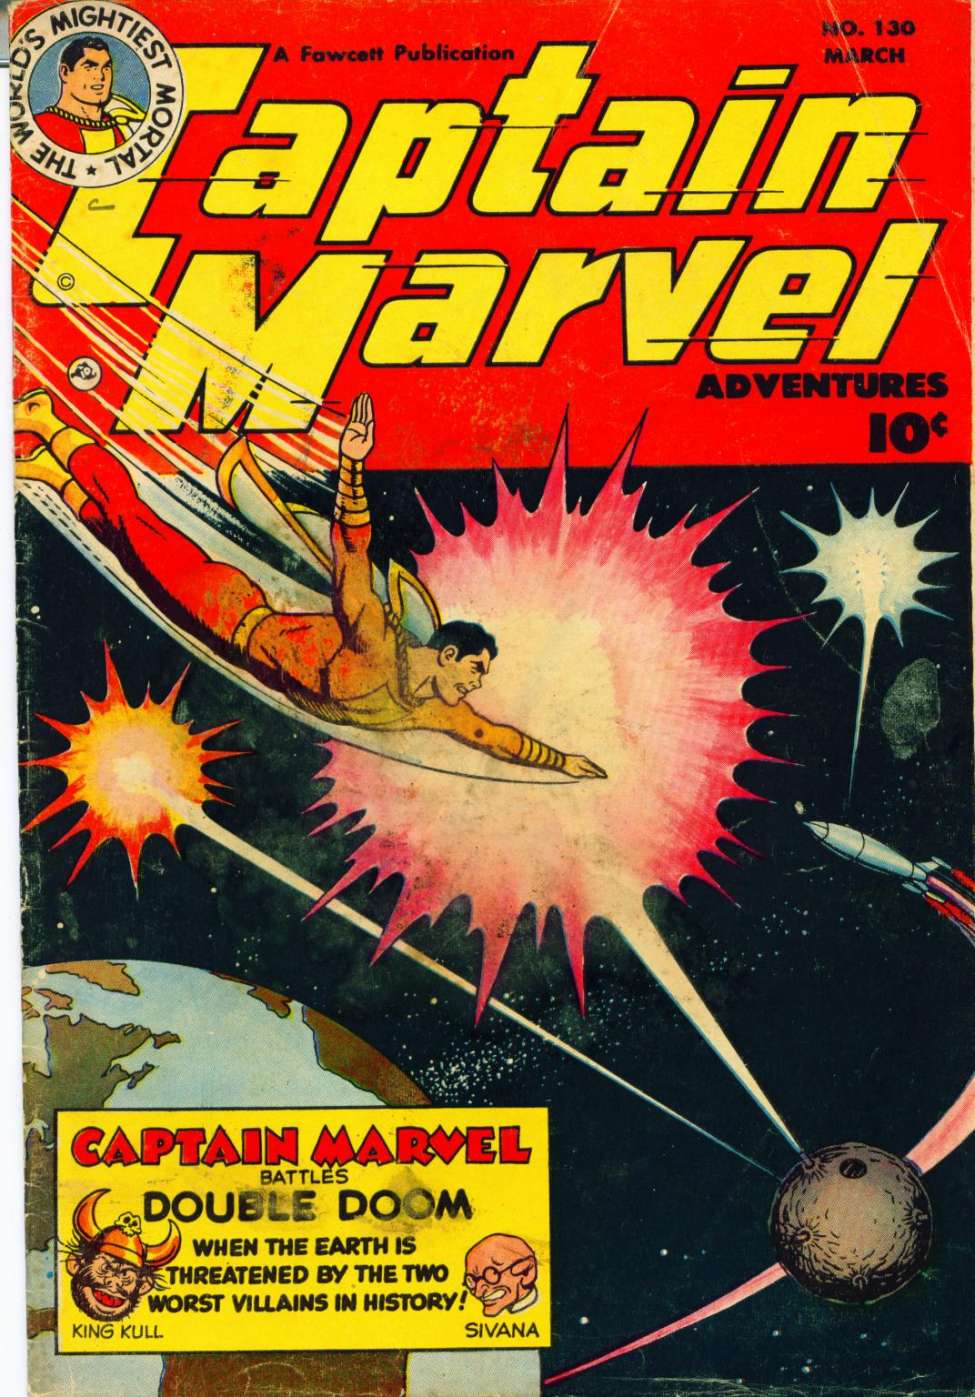 Book Cover For Captain Marvel Adventures 130